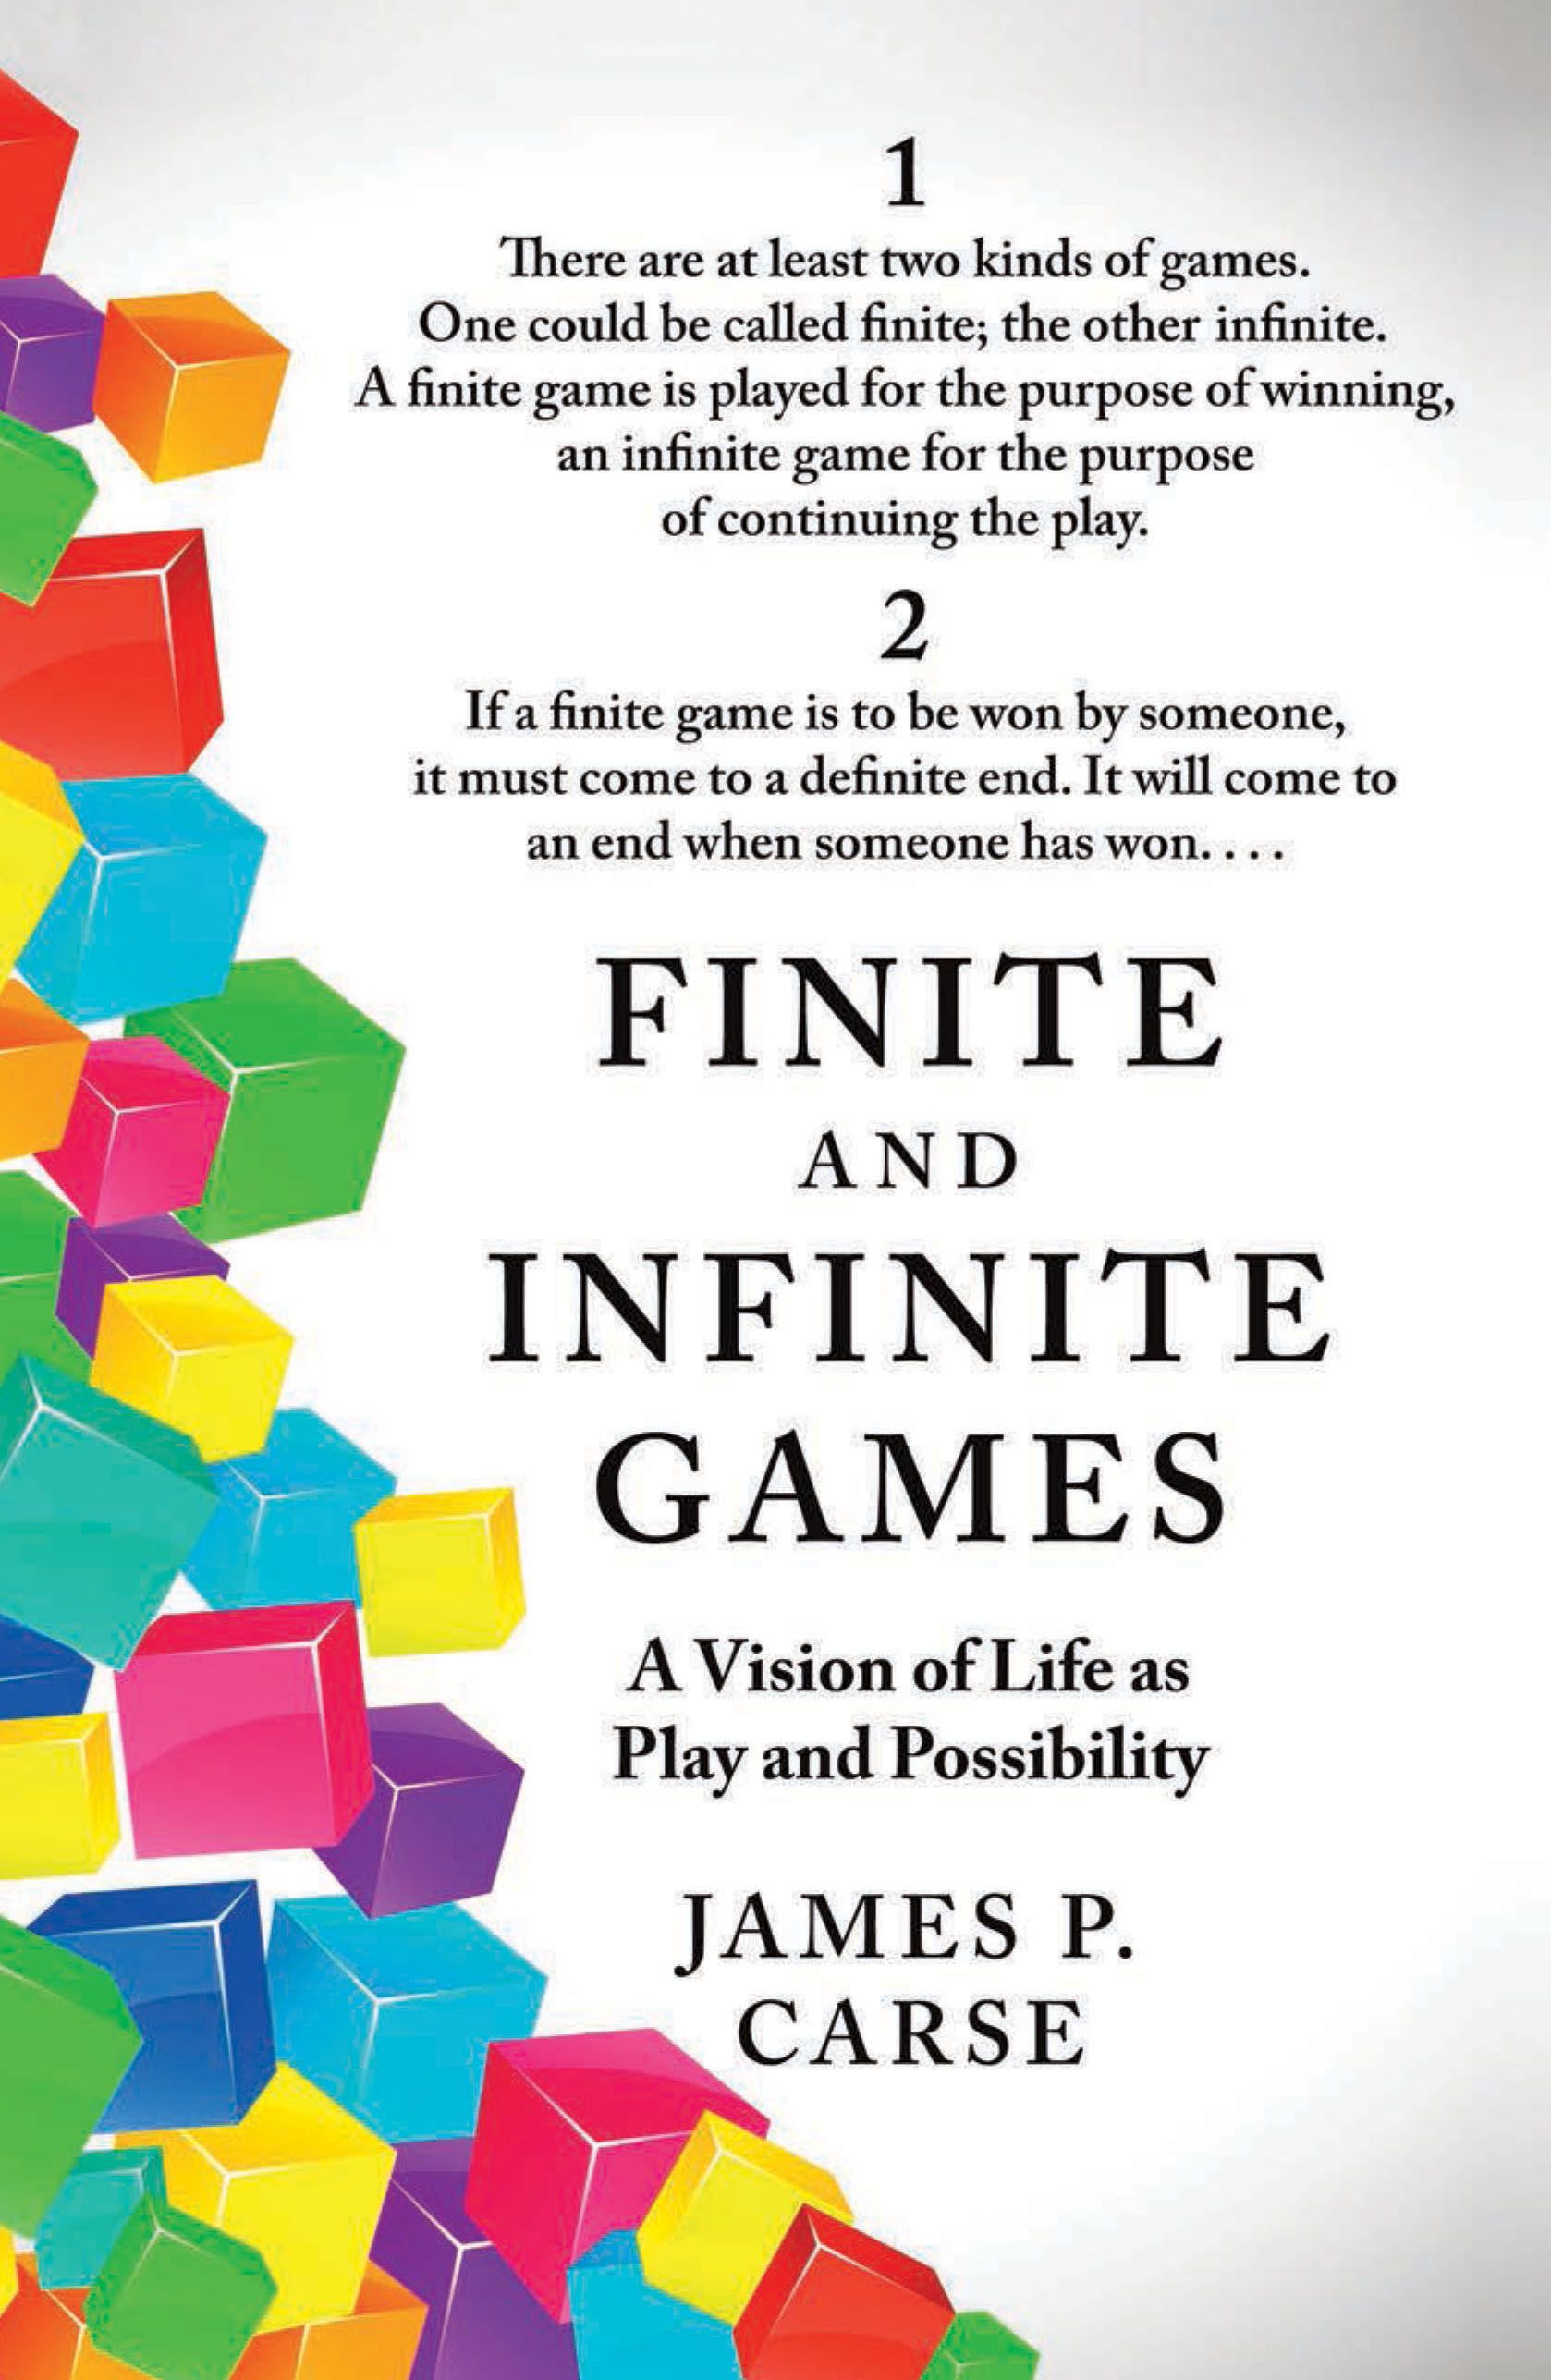 A useful book: Finite and Infinite Games, by James P. Carse